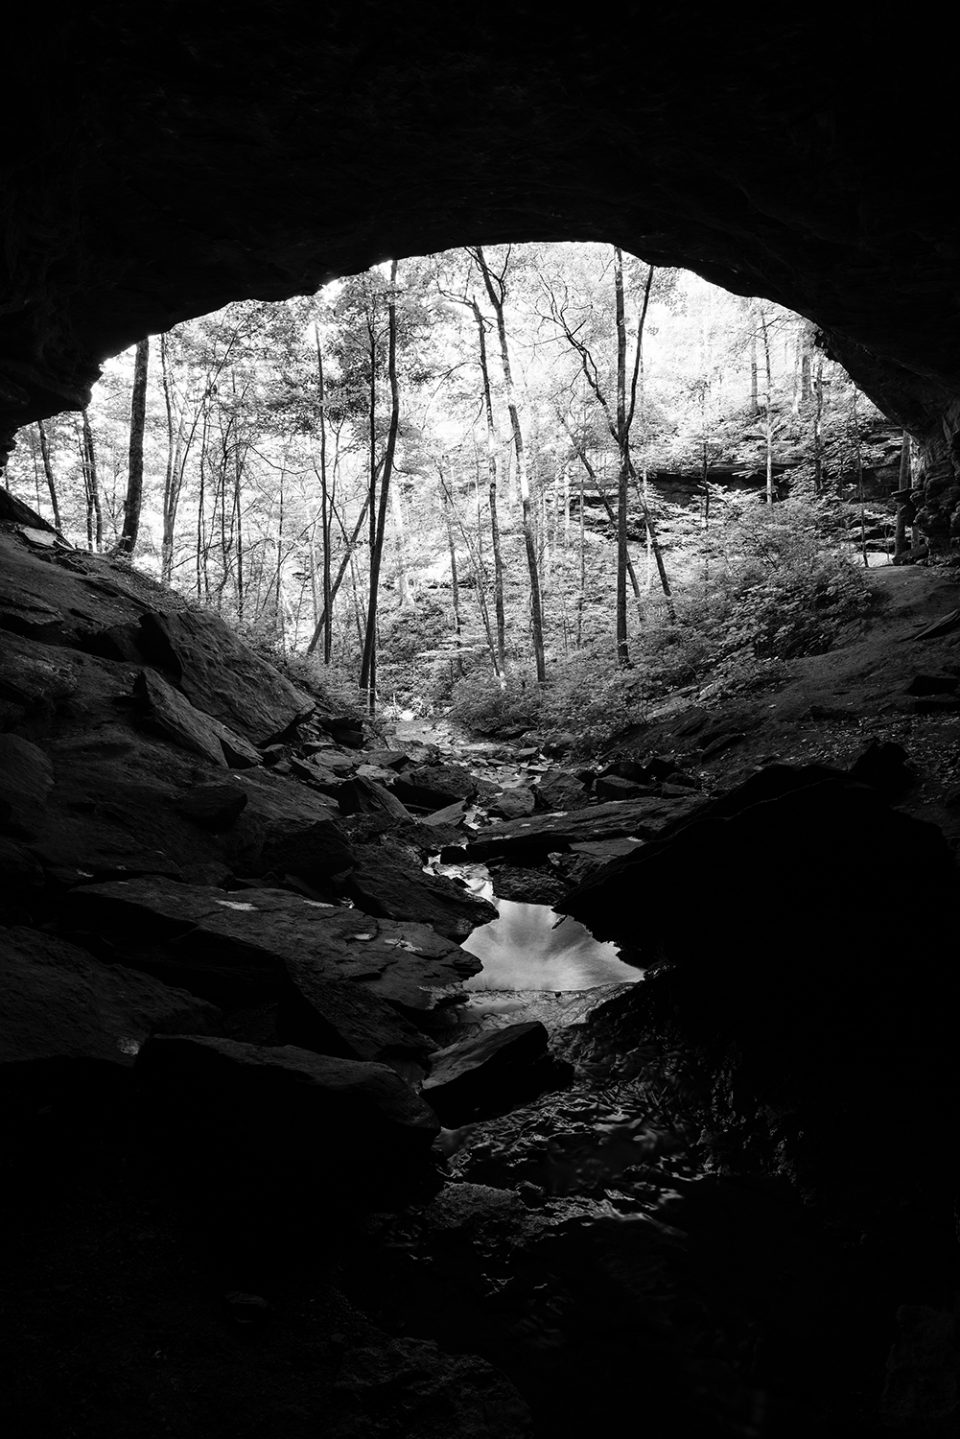 The stream running toward the mouth of the cave, black and white photograph by Keith Dotson.